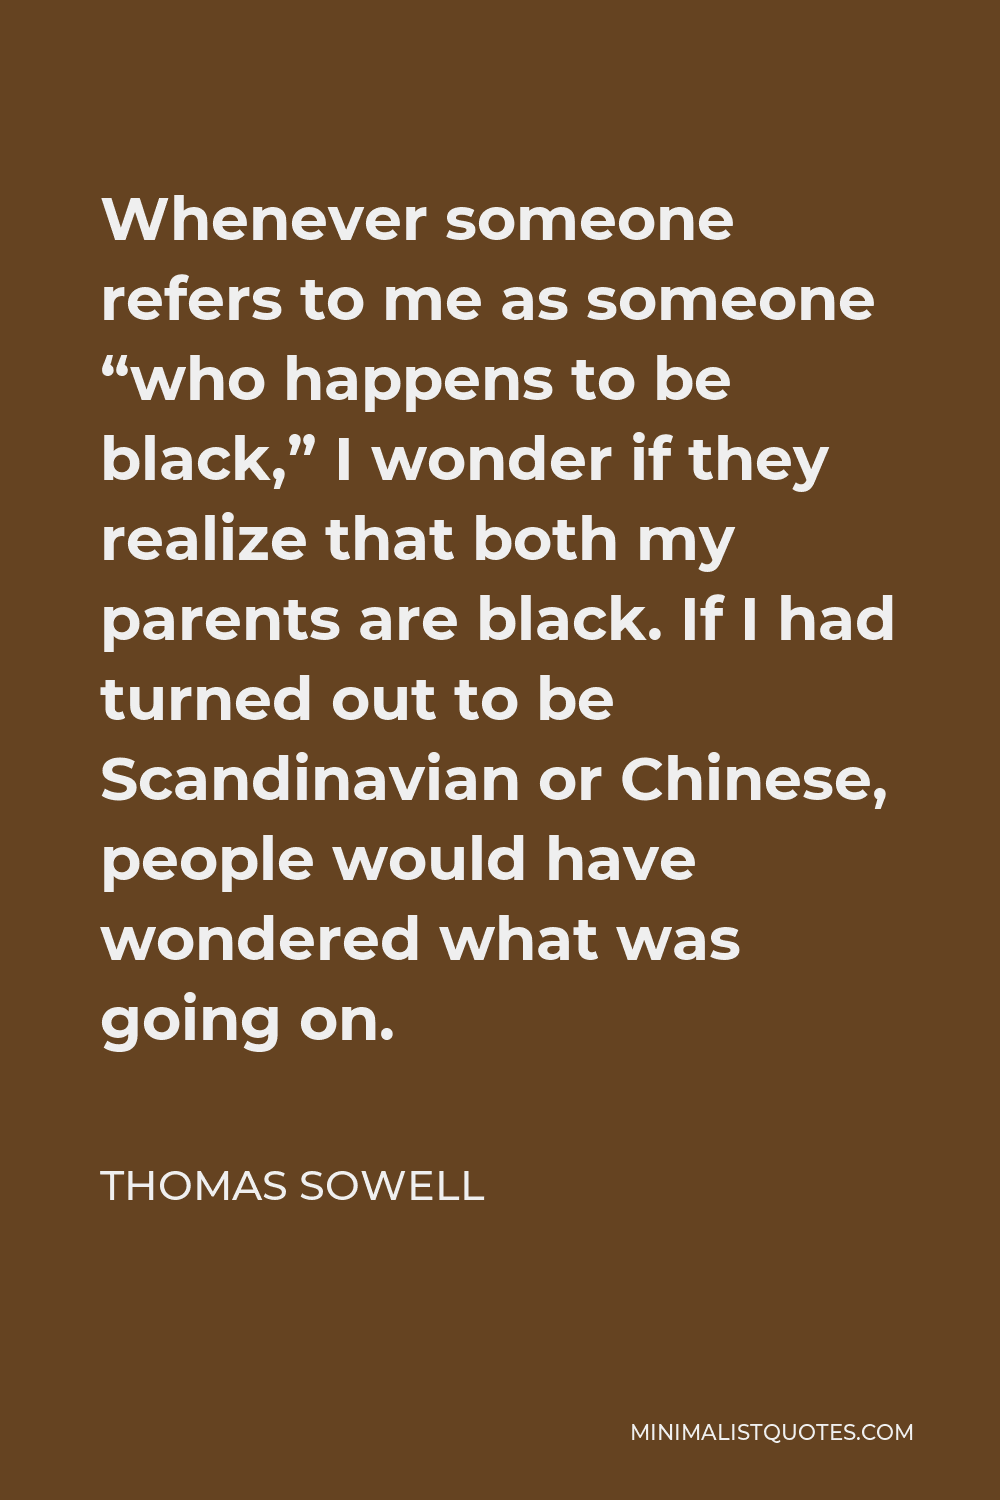 Thomas Sowell Quote - Whenever someone refers to me as someone “who happens to be black,” I wonder if they realize that both my parents are black. If I had turned out to be Scandinavian or Chinese, people would have wondered what was going on.